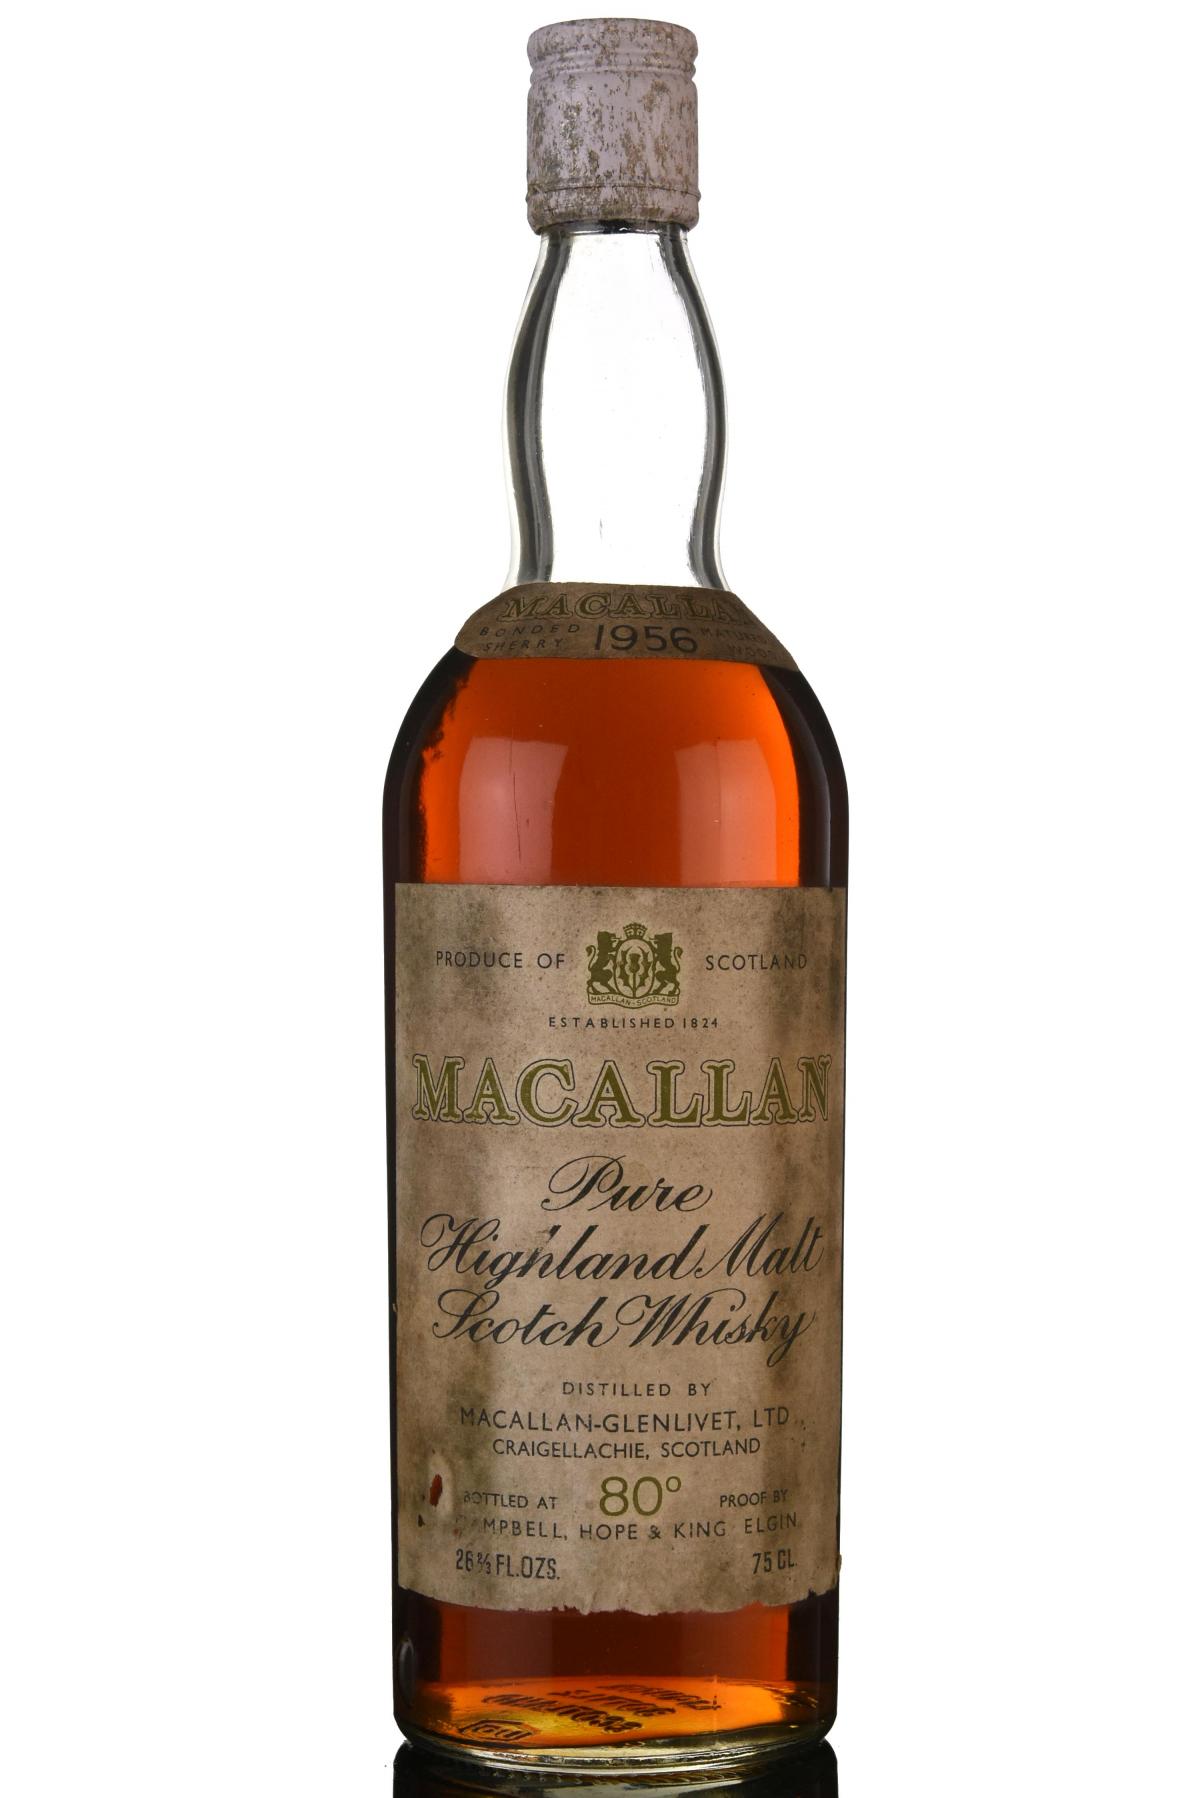 Macallan 1957 - Campbell Hope & King - 1970s